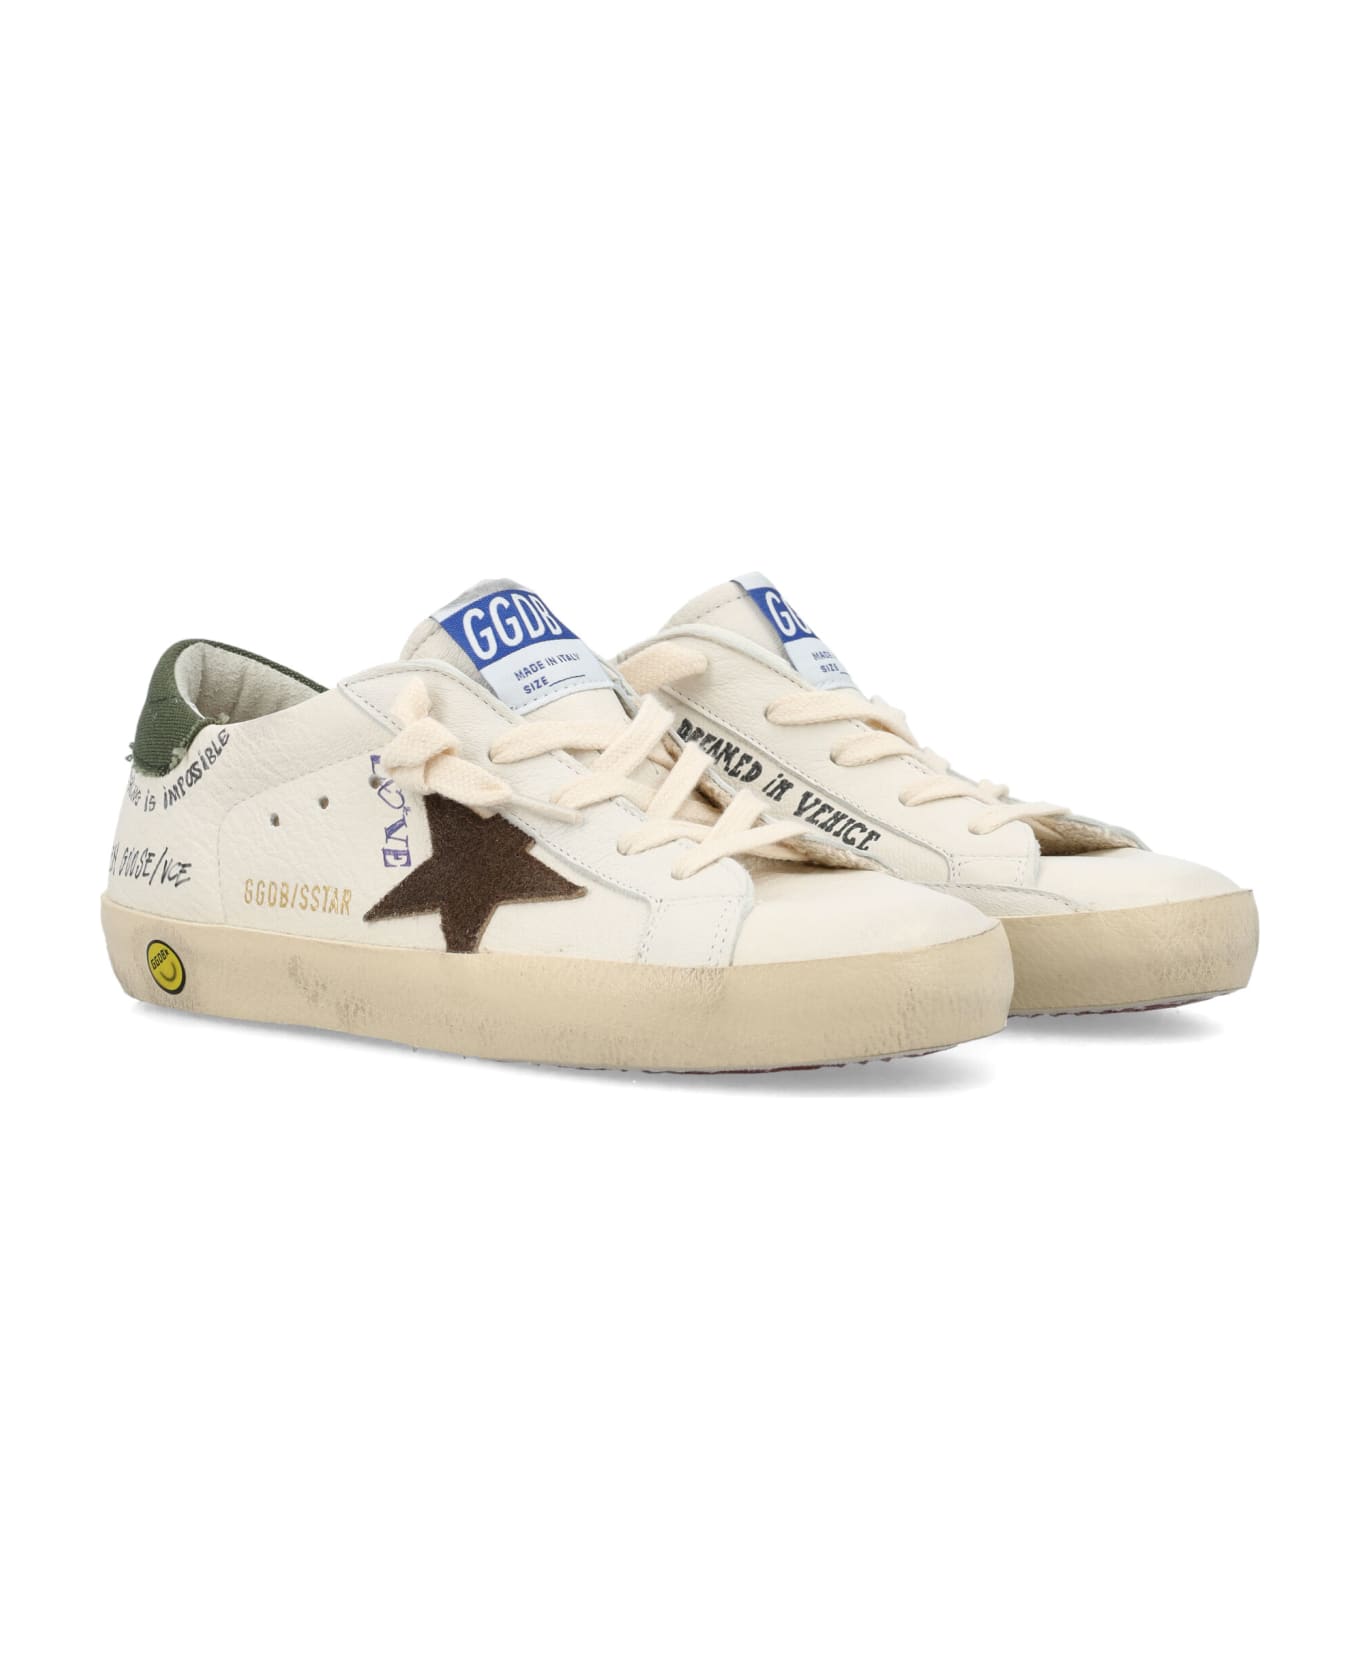 Golden Goose Super Star Sneakers - WHITE/BROWN/GREEN